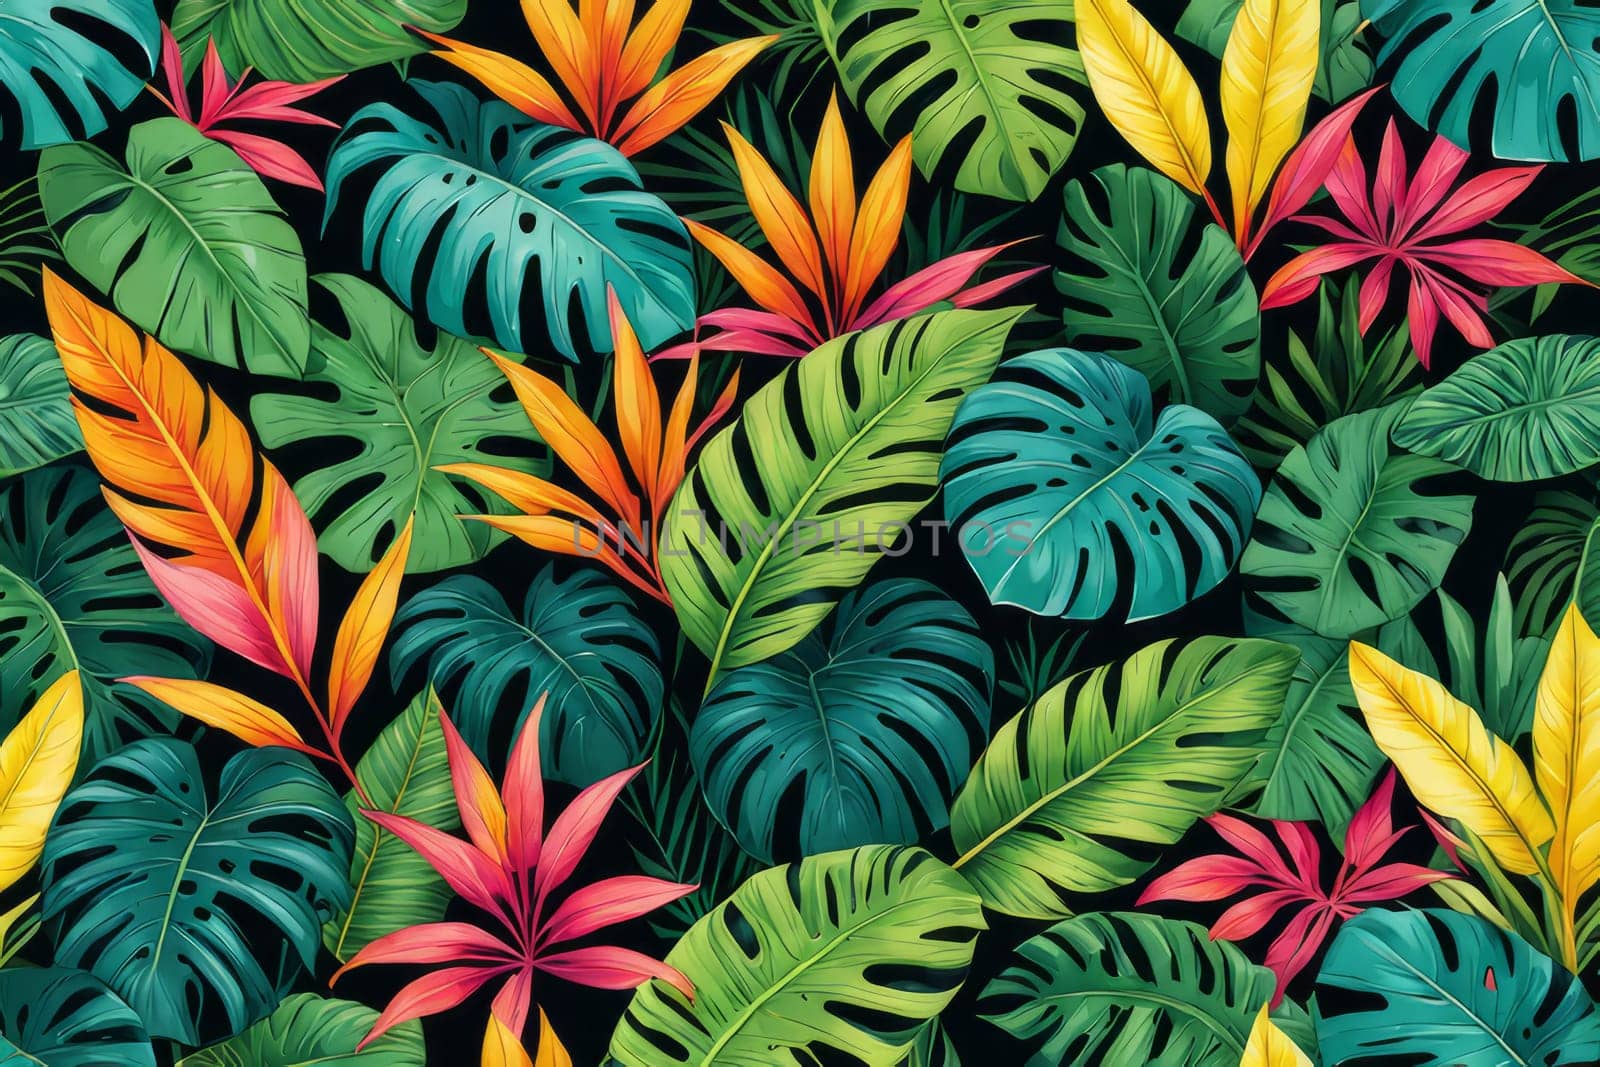 Exotic greenery and colorful foliage creating a striking composition